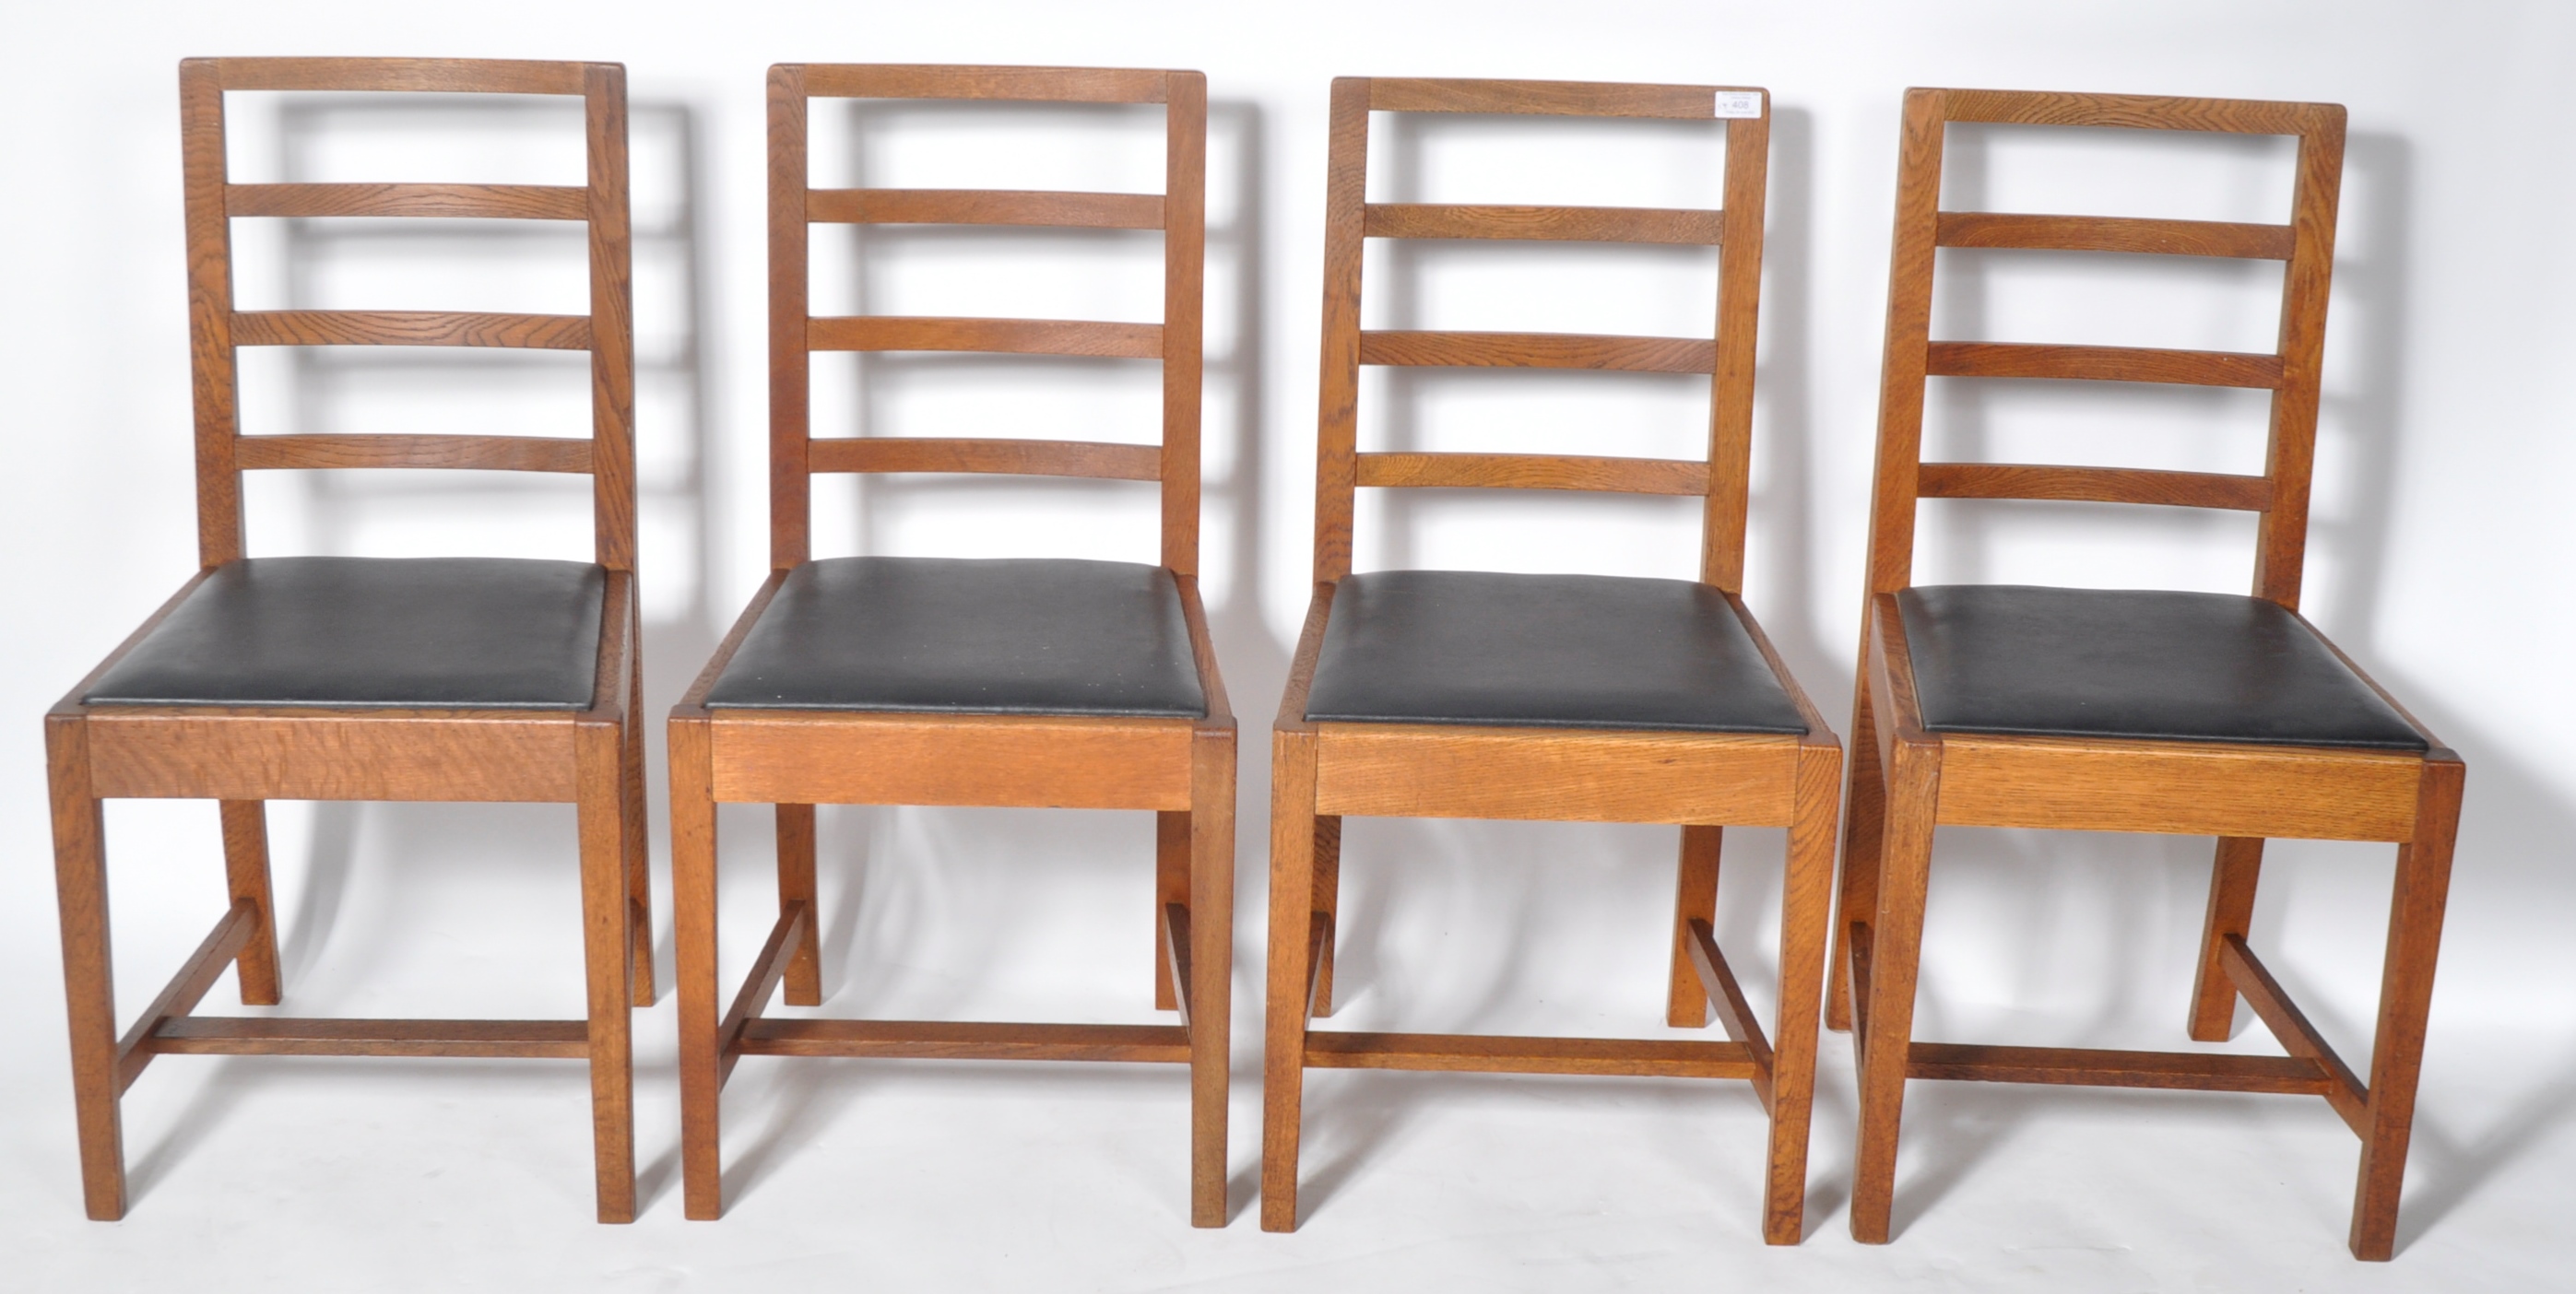 FRANK WHITTON FOR GORDON RUSSELL - SET OF FOUR OAK CHAIRS - Image 2 of 6